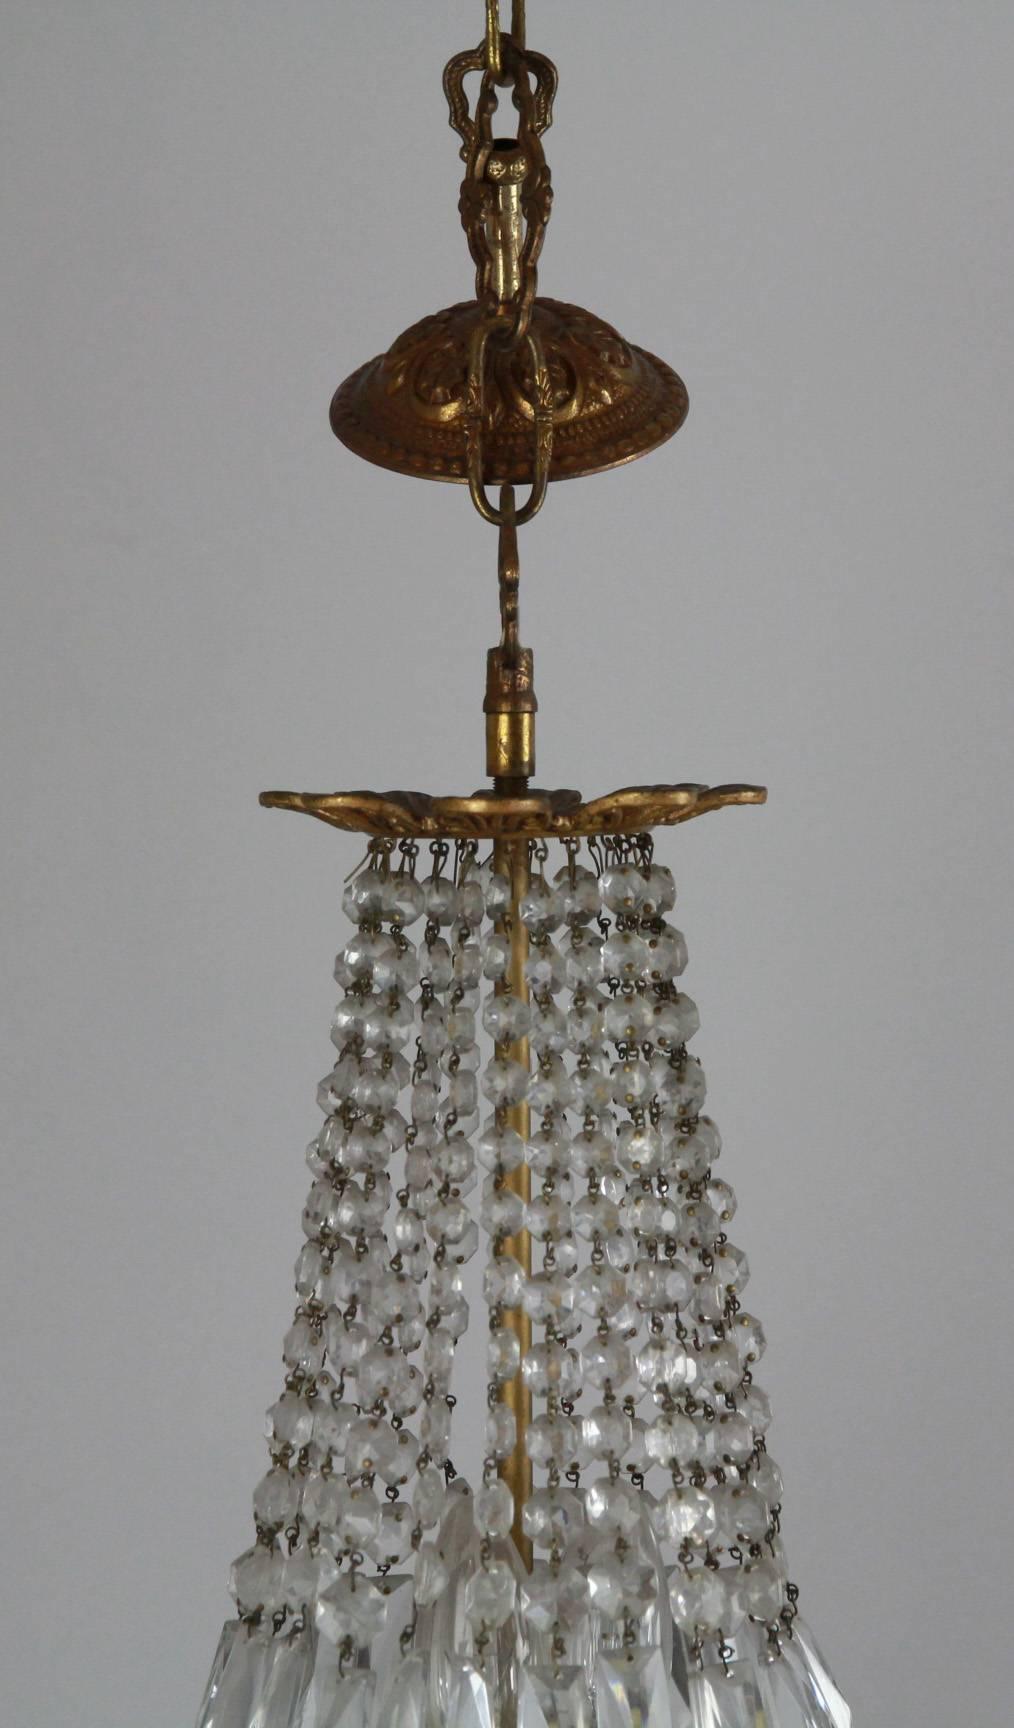 An English small bag and swag pendant chandelier, comprised of rectangular hand cut plaques threaded with hand cut button drops on an embossed gilt frame with ceiling dome and chain.